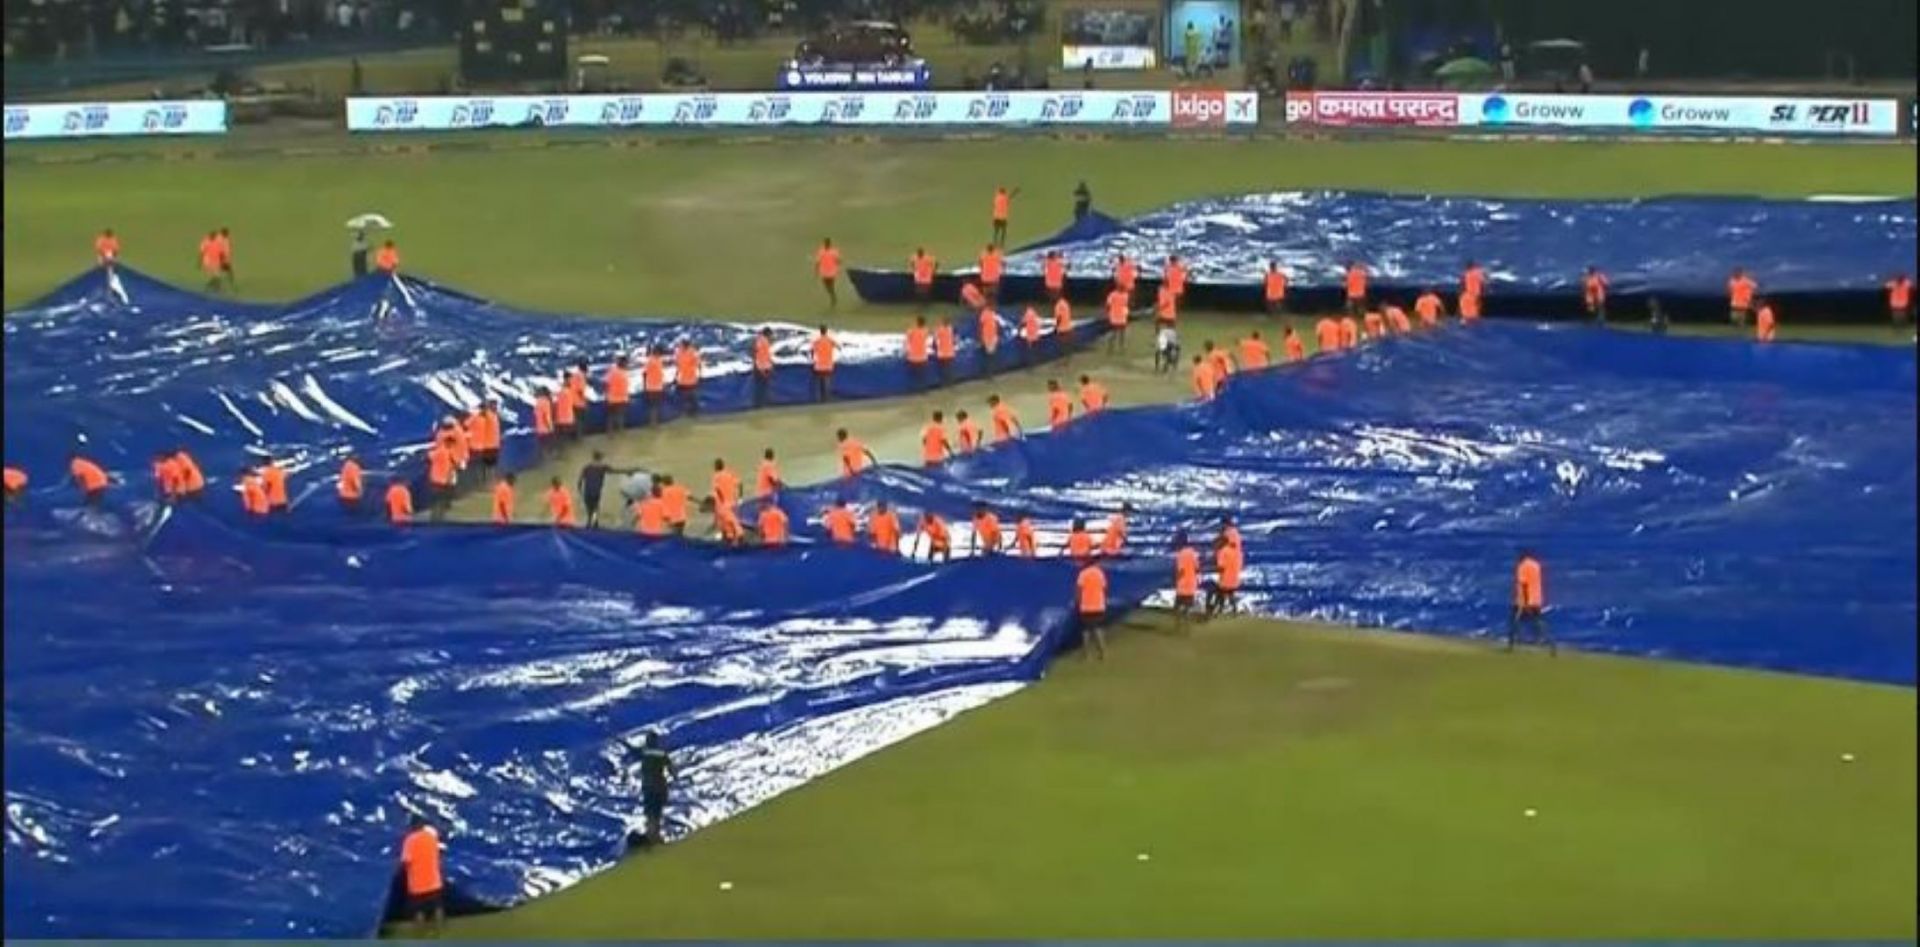 The all too famliar rain stopped play yet again in Colombo